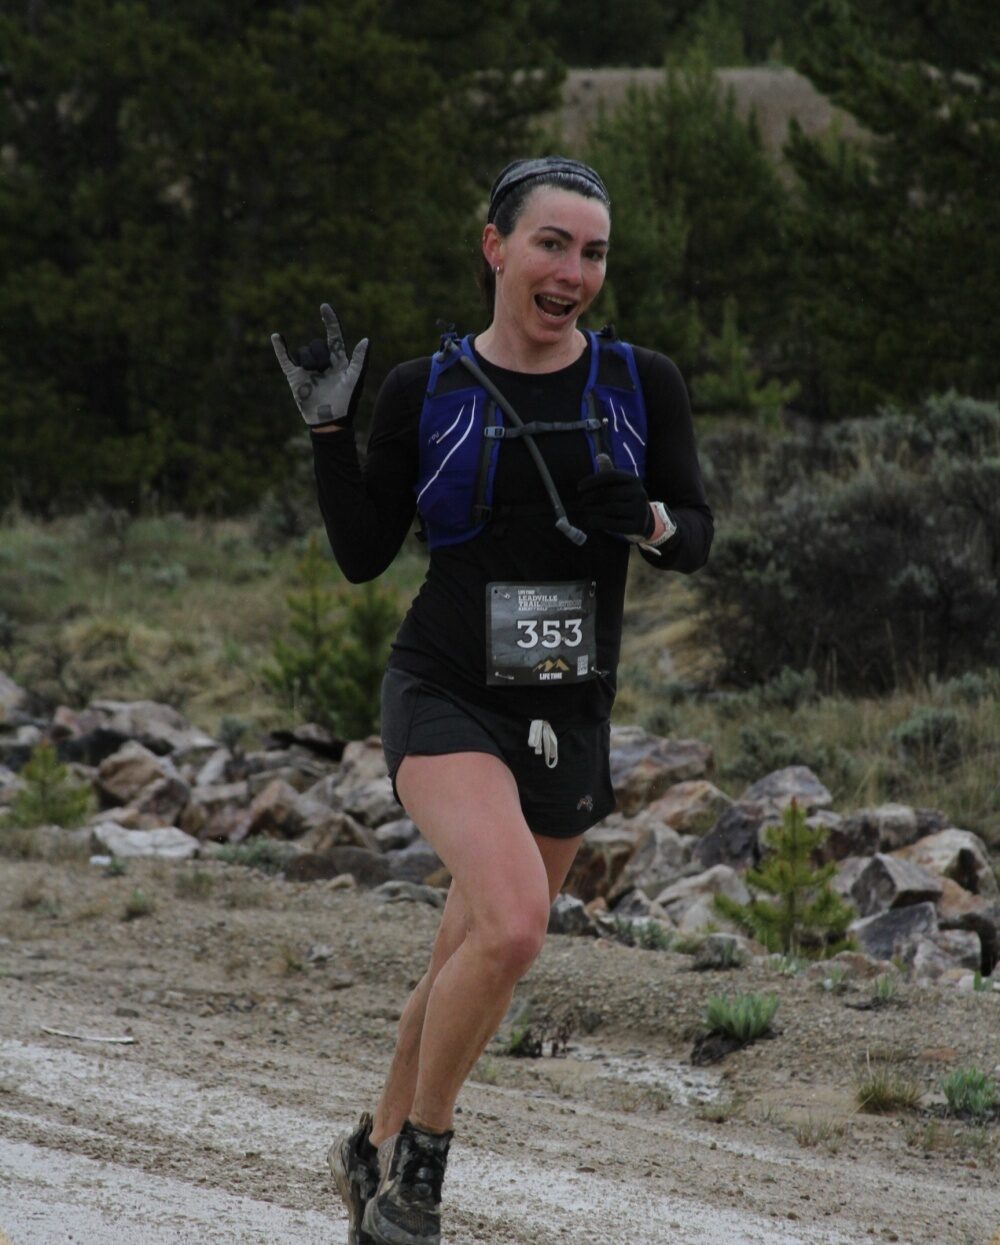 A person wearing a black outfit and a blue hydration pack is running on a dirt path with vegetation and rocks around. They are holding up their left hand in a gesture with the index finger, pinky finger, and thumb extended. They are wearing a race bib numbered 353.